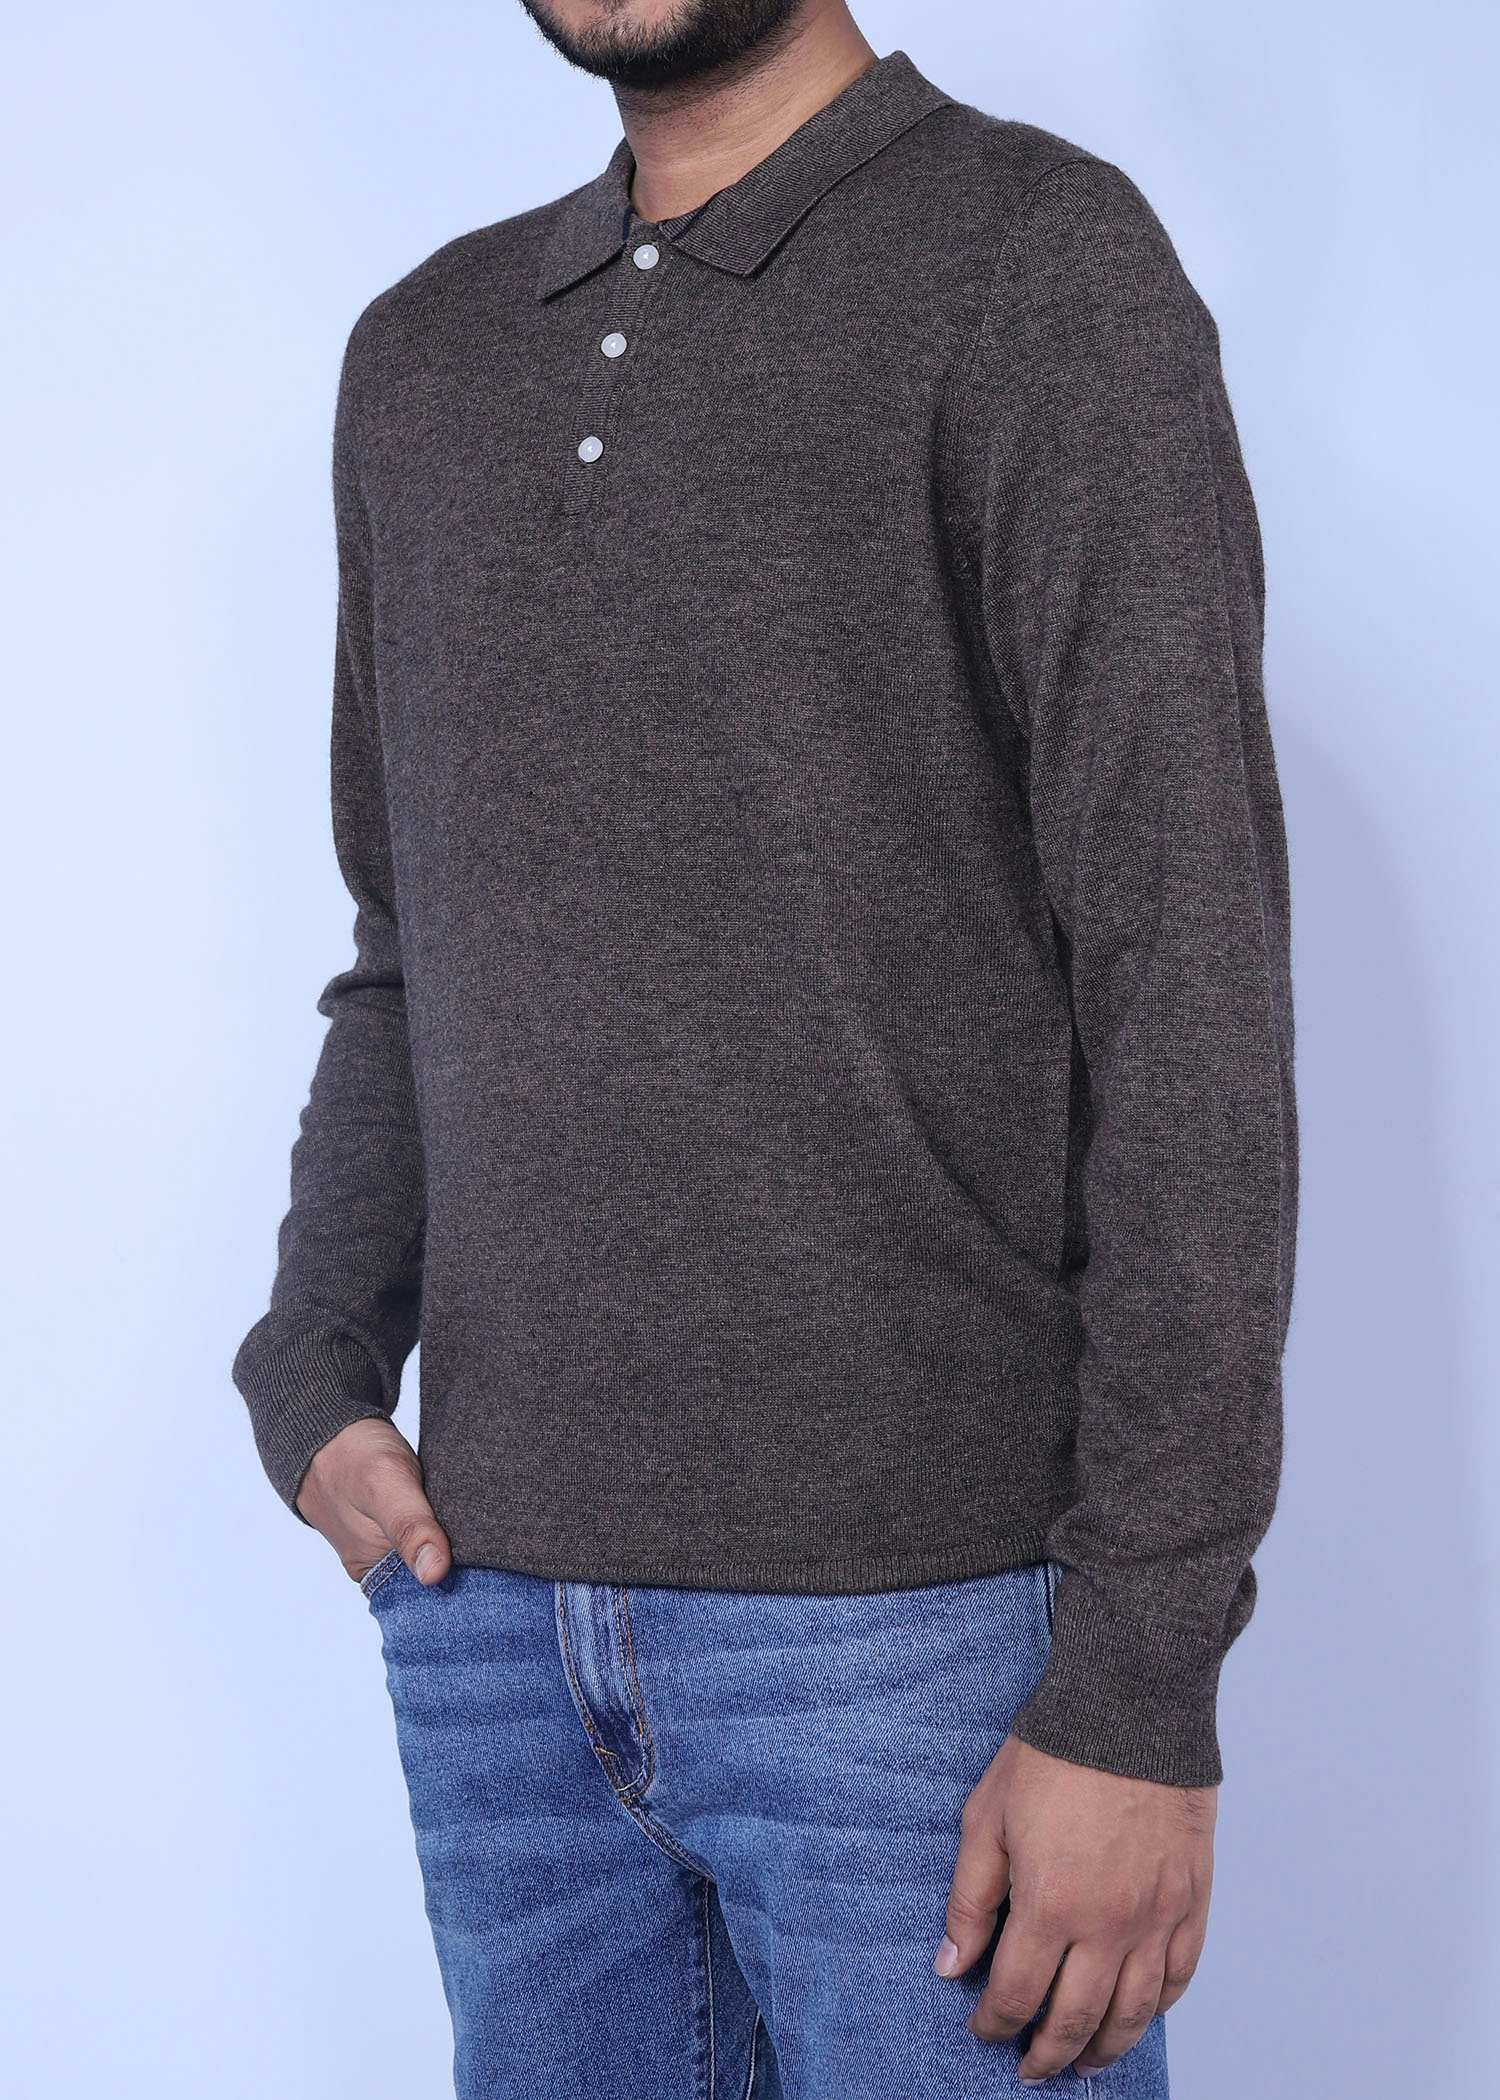 athens sweater brown color half side view